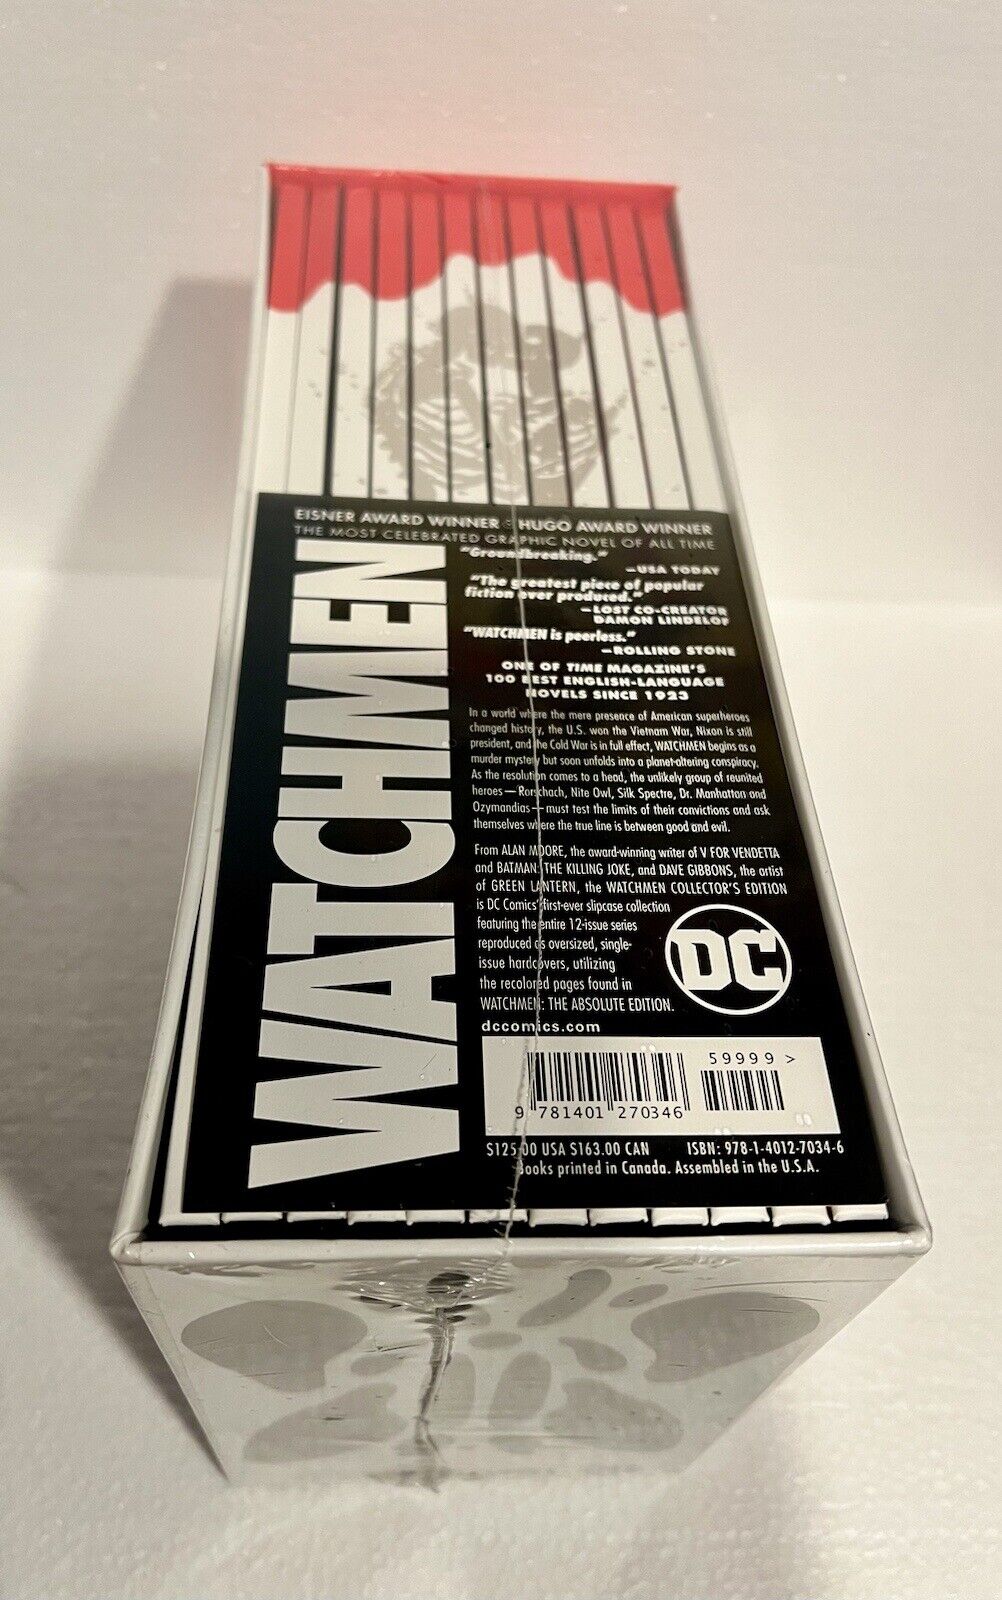 Watchmen: The Absolute Edition 12 Volume Graphic Novels DC (Sealed/Brand New) 📚